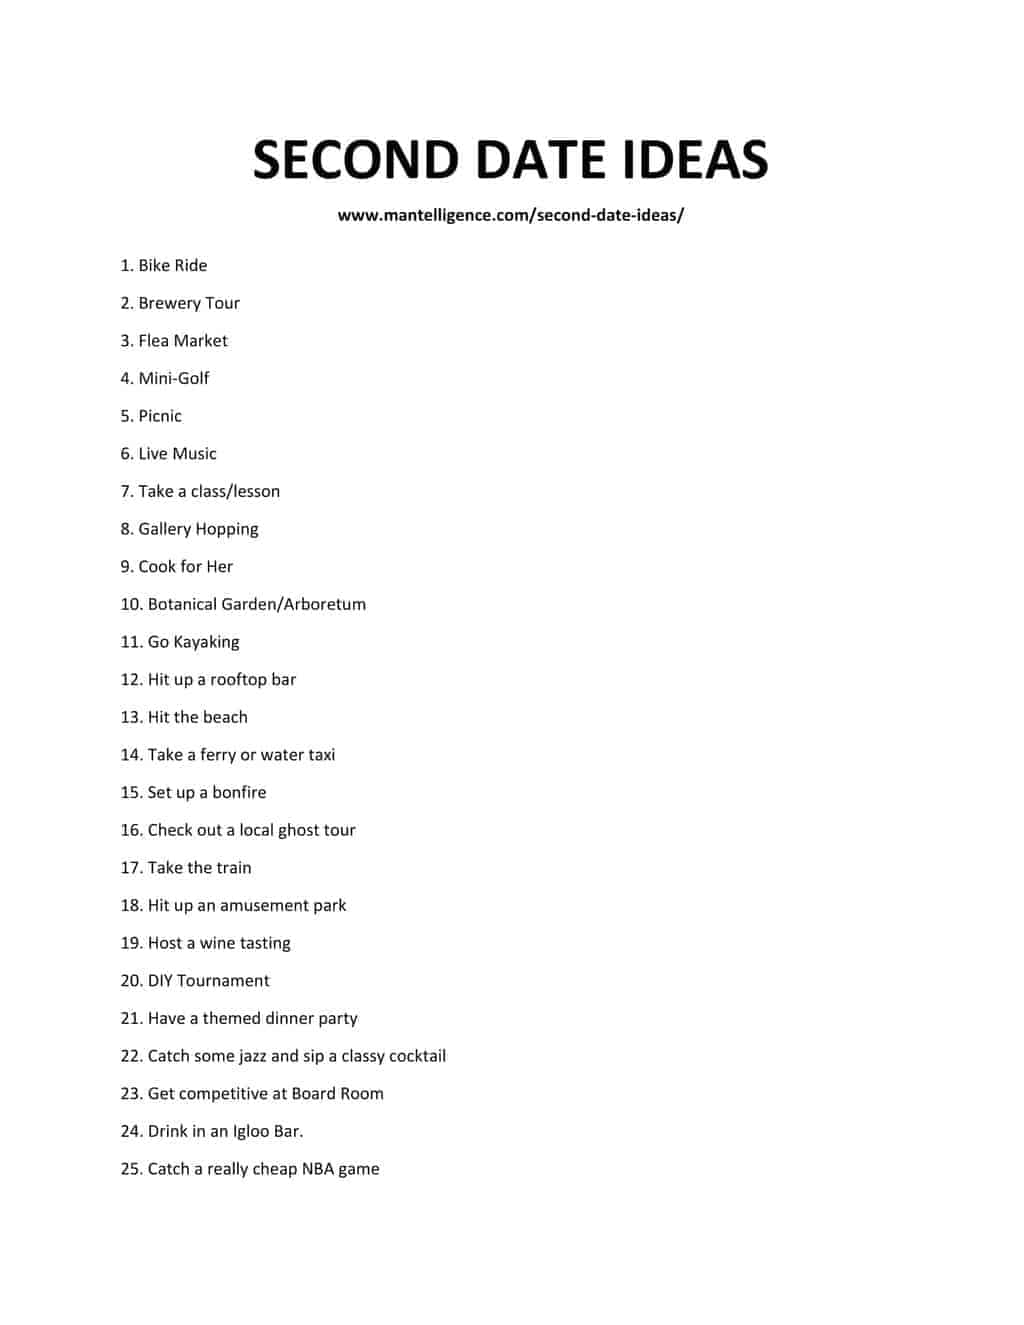 Downloadable list of SECOND DATE IDEAS